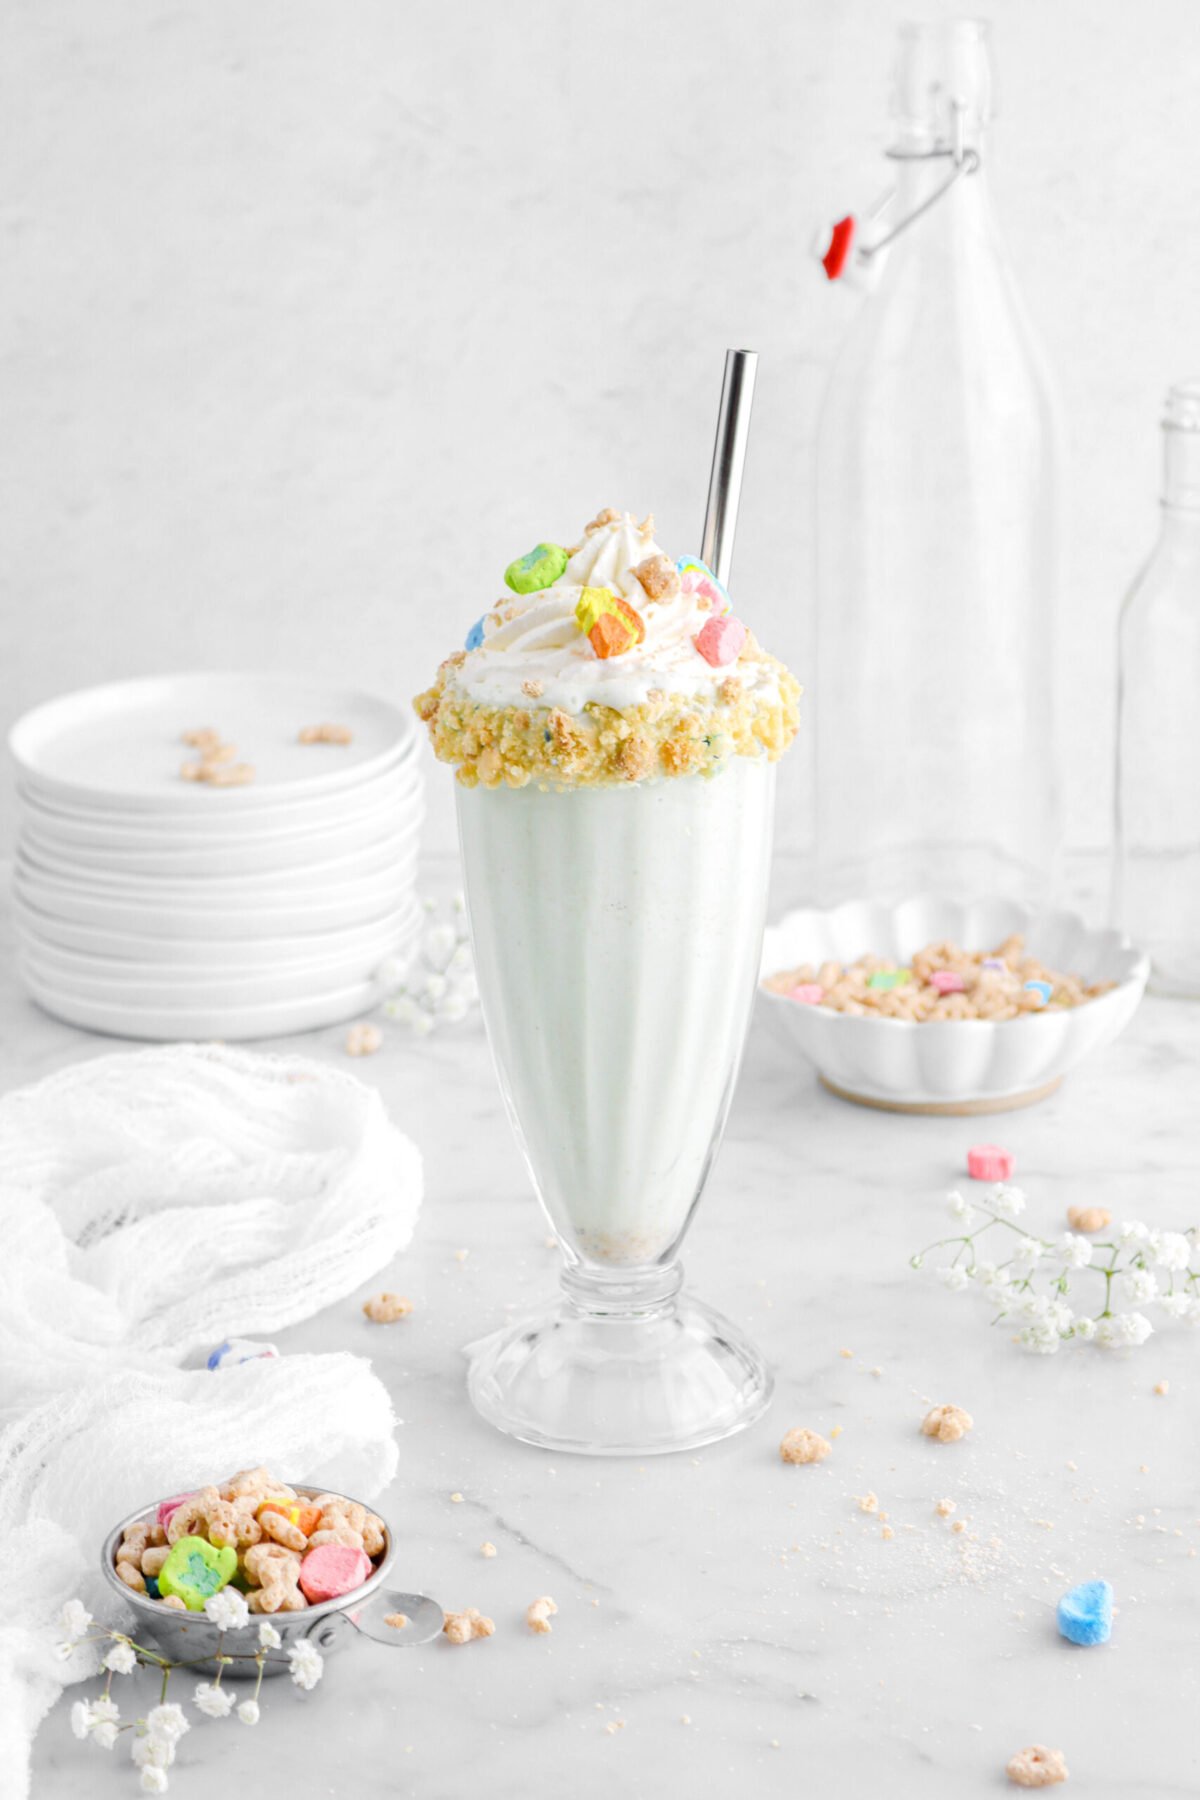 lucky charms in milkshake glass with metal straw, more cereal around, and white flowers.